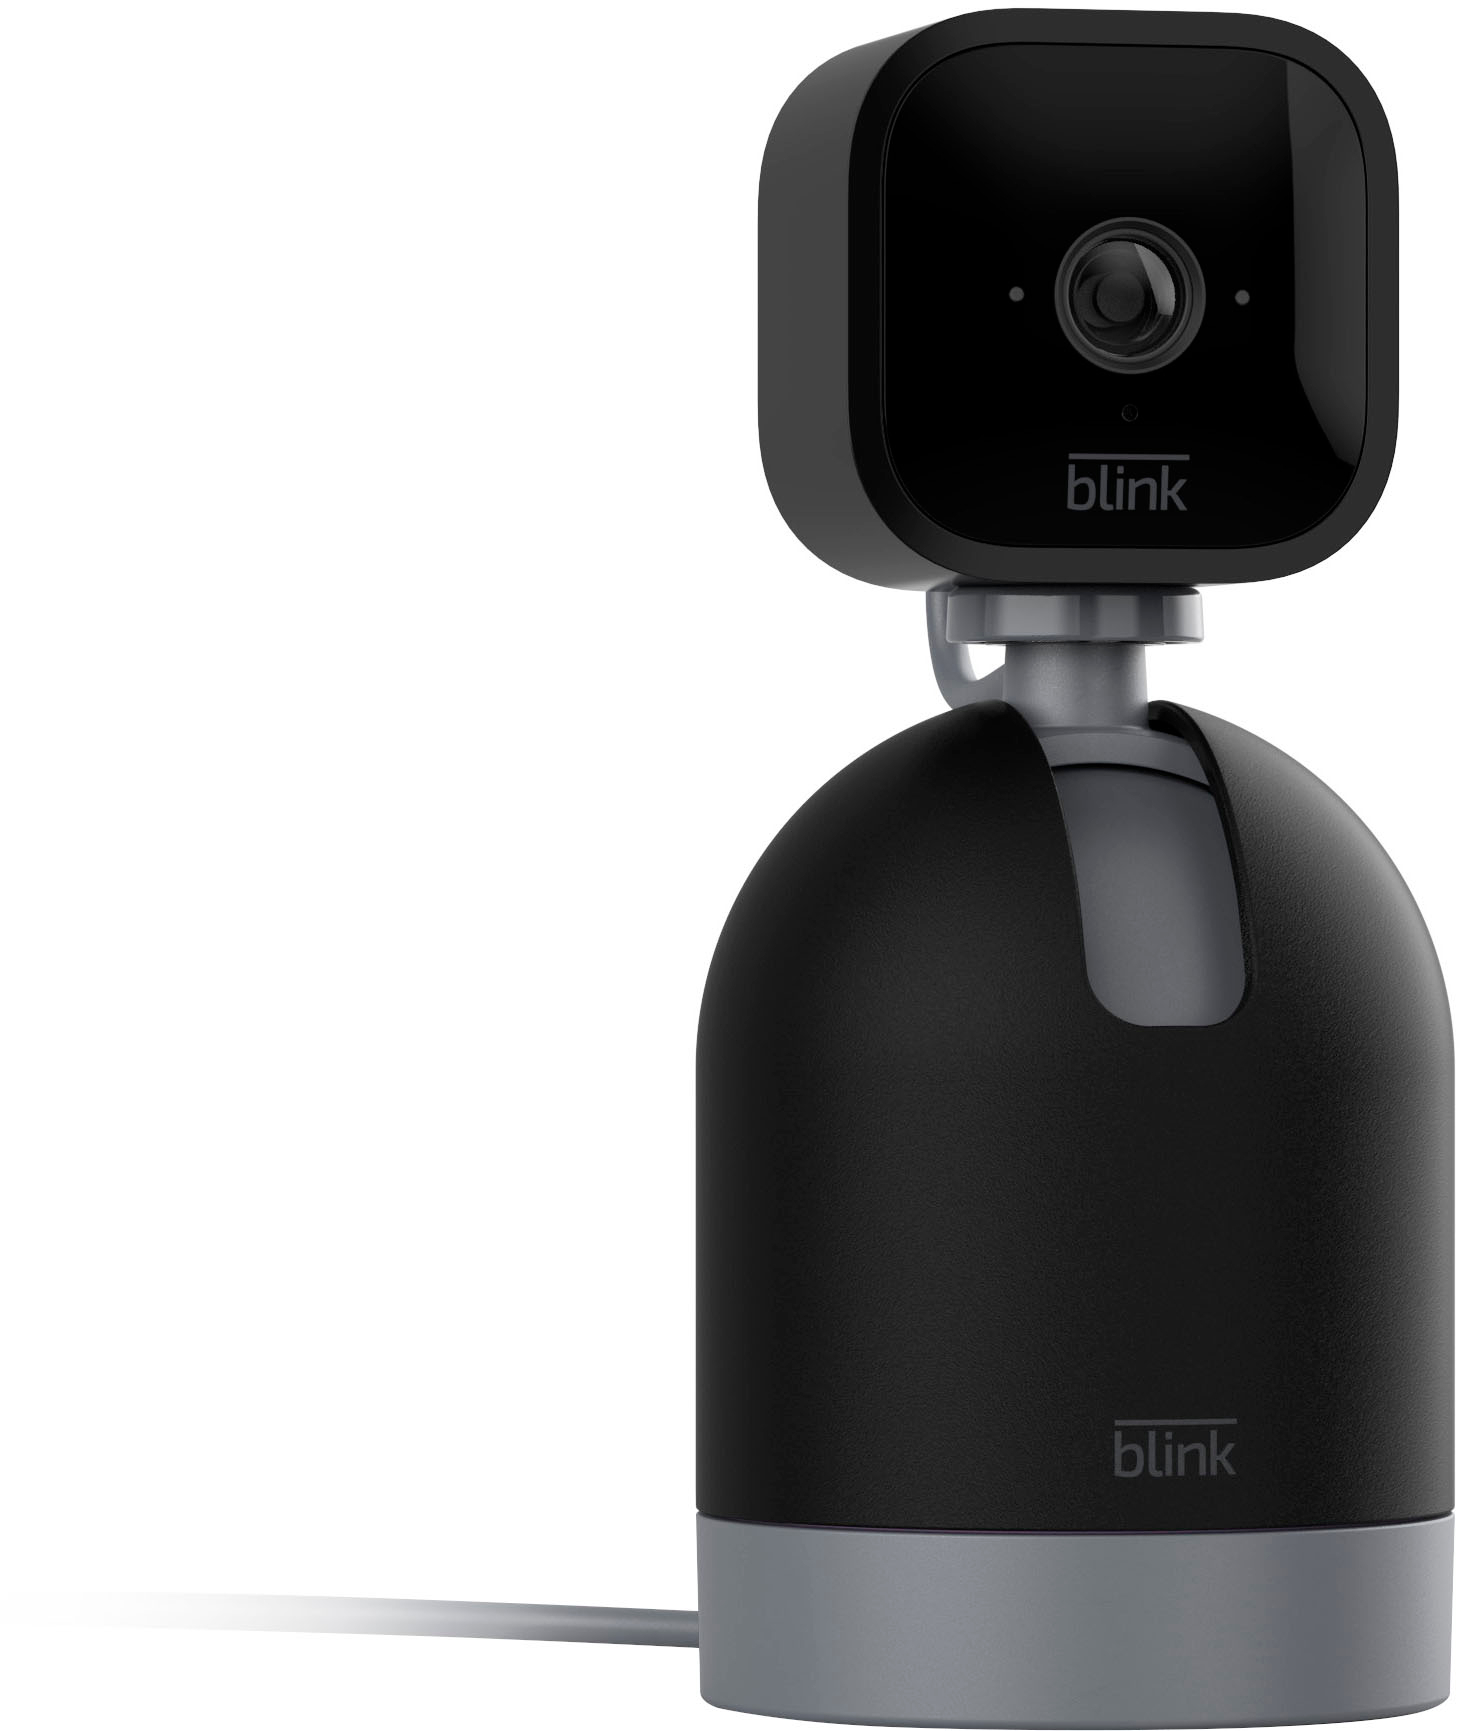 Blink Security Camera 2022 Review